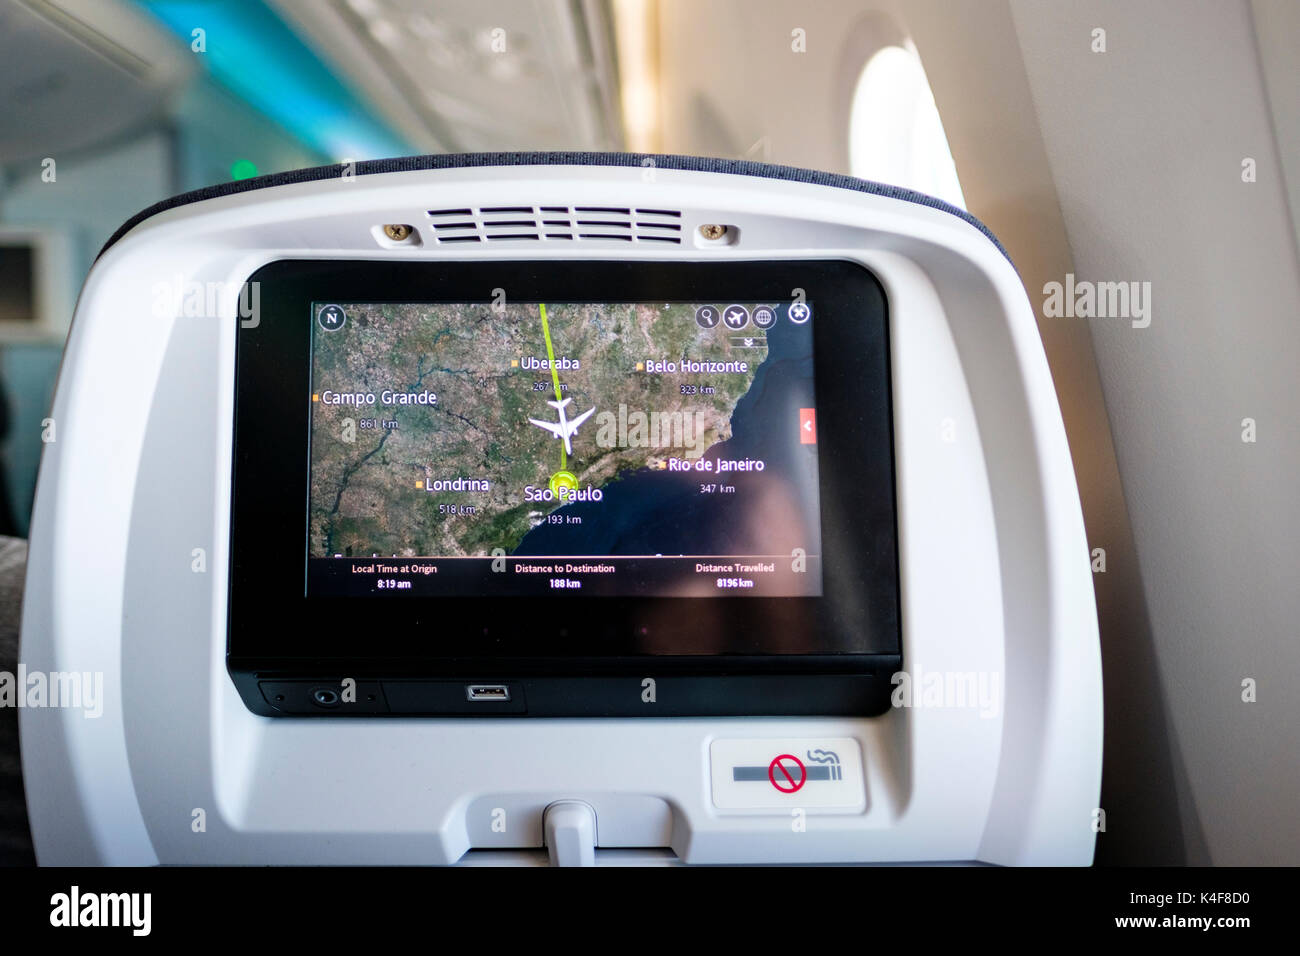 Air travel, Boeing 787 headrest screen showing destination information, route map, airplane arriving in Sao Paulo, Brazil Stock Photo